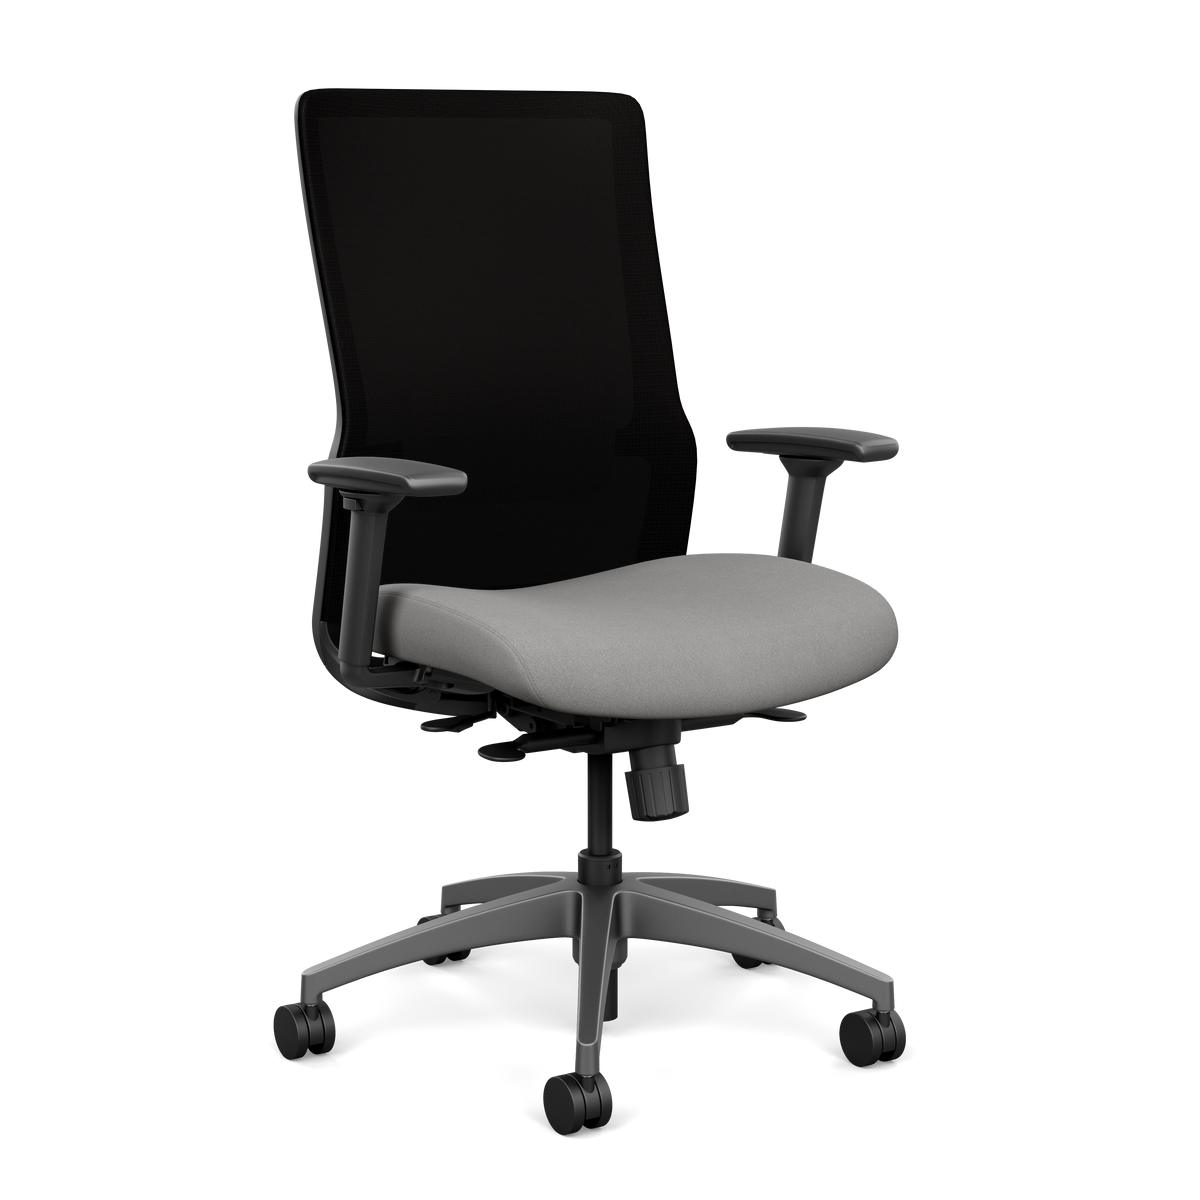 SitOnIt - Novo Task Chair - Duckys Office Furniture